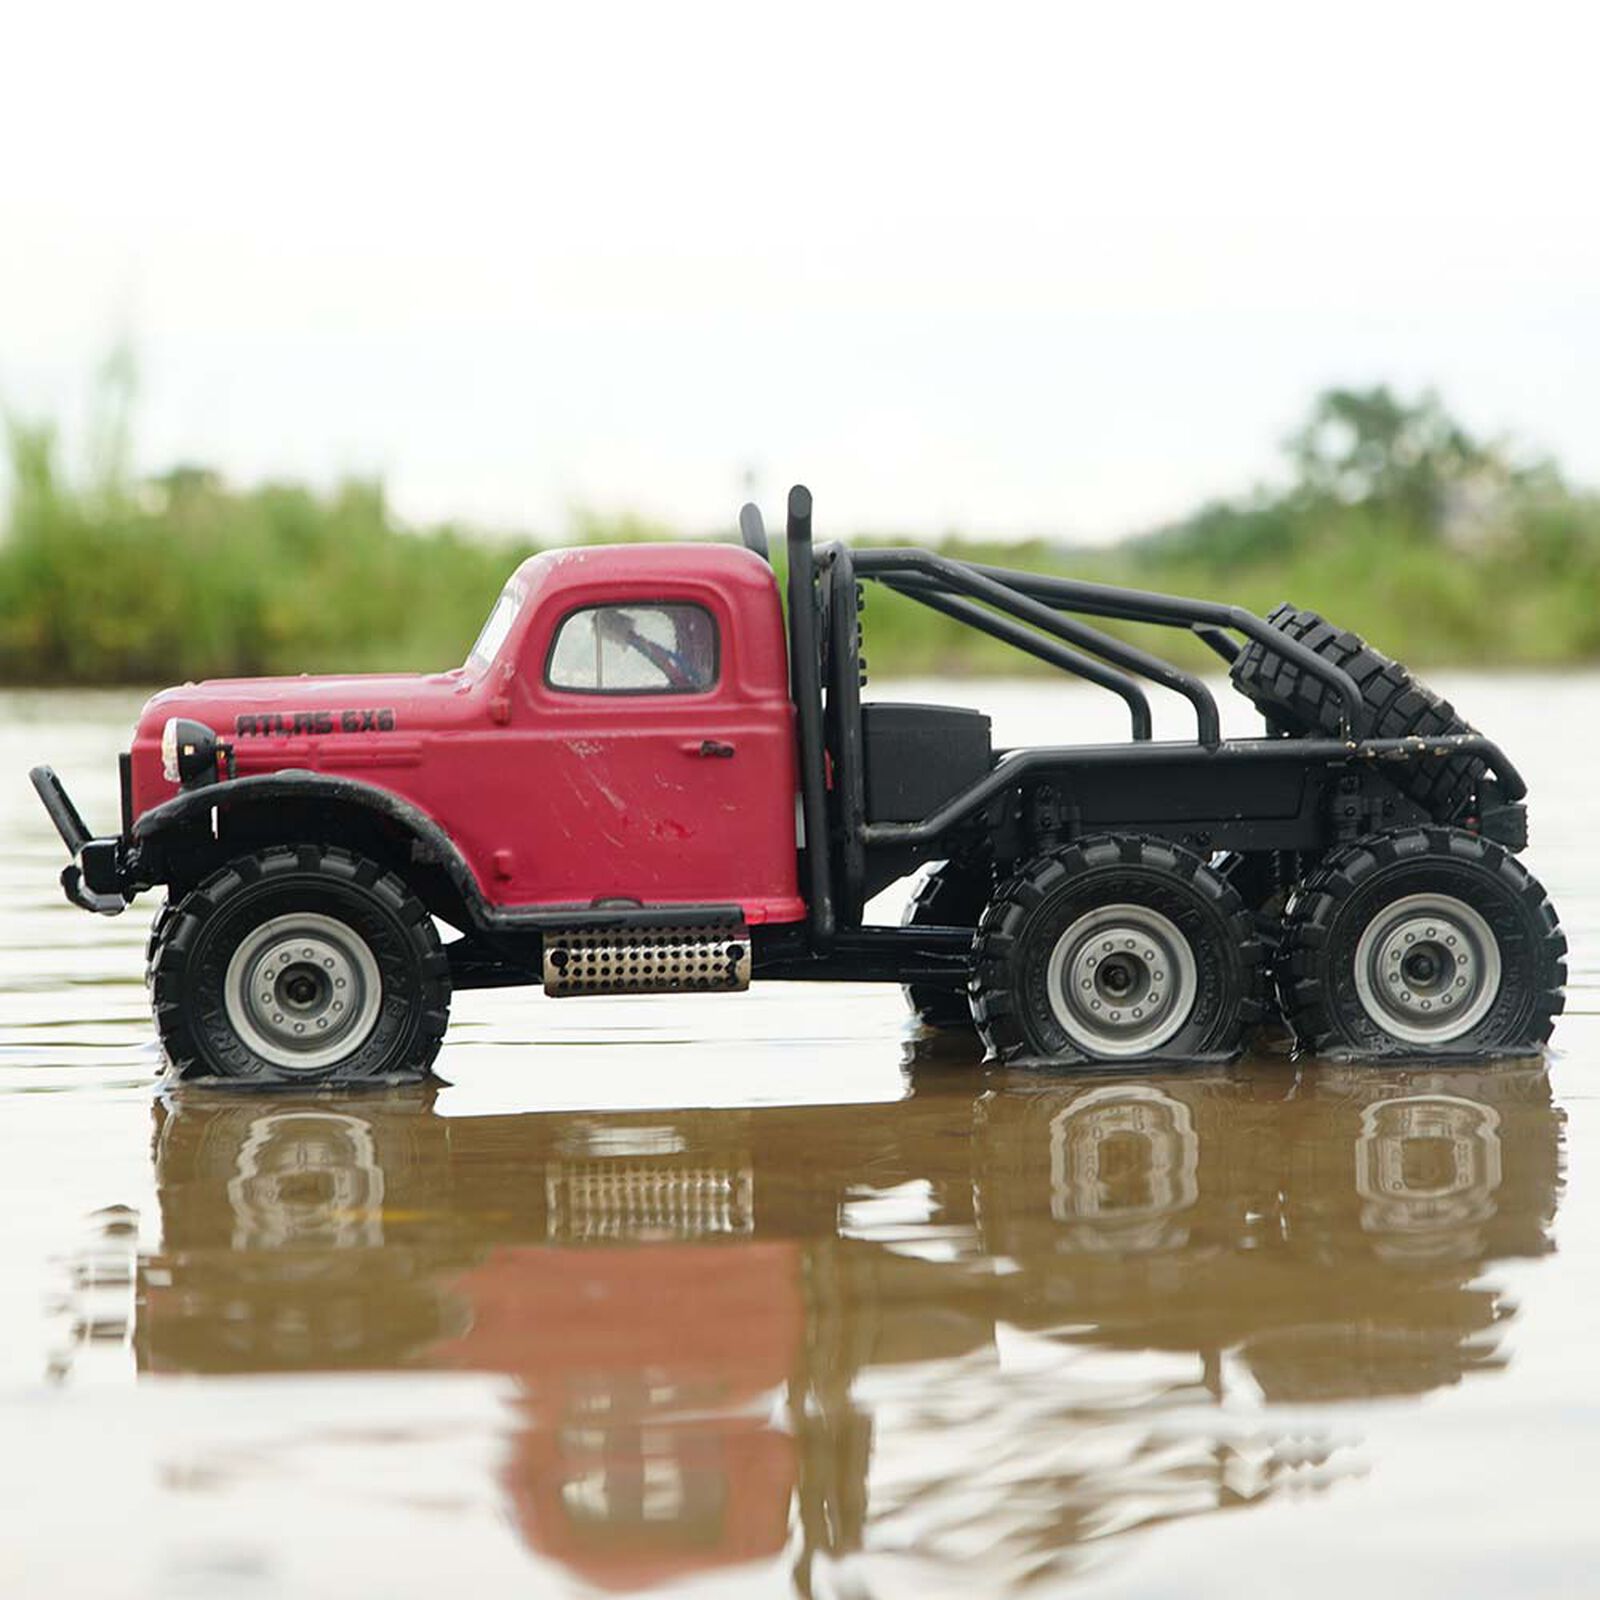 RTR Small Scale Rock Crawlers Under $160